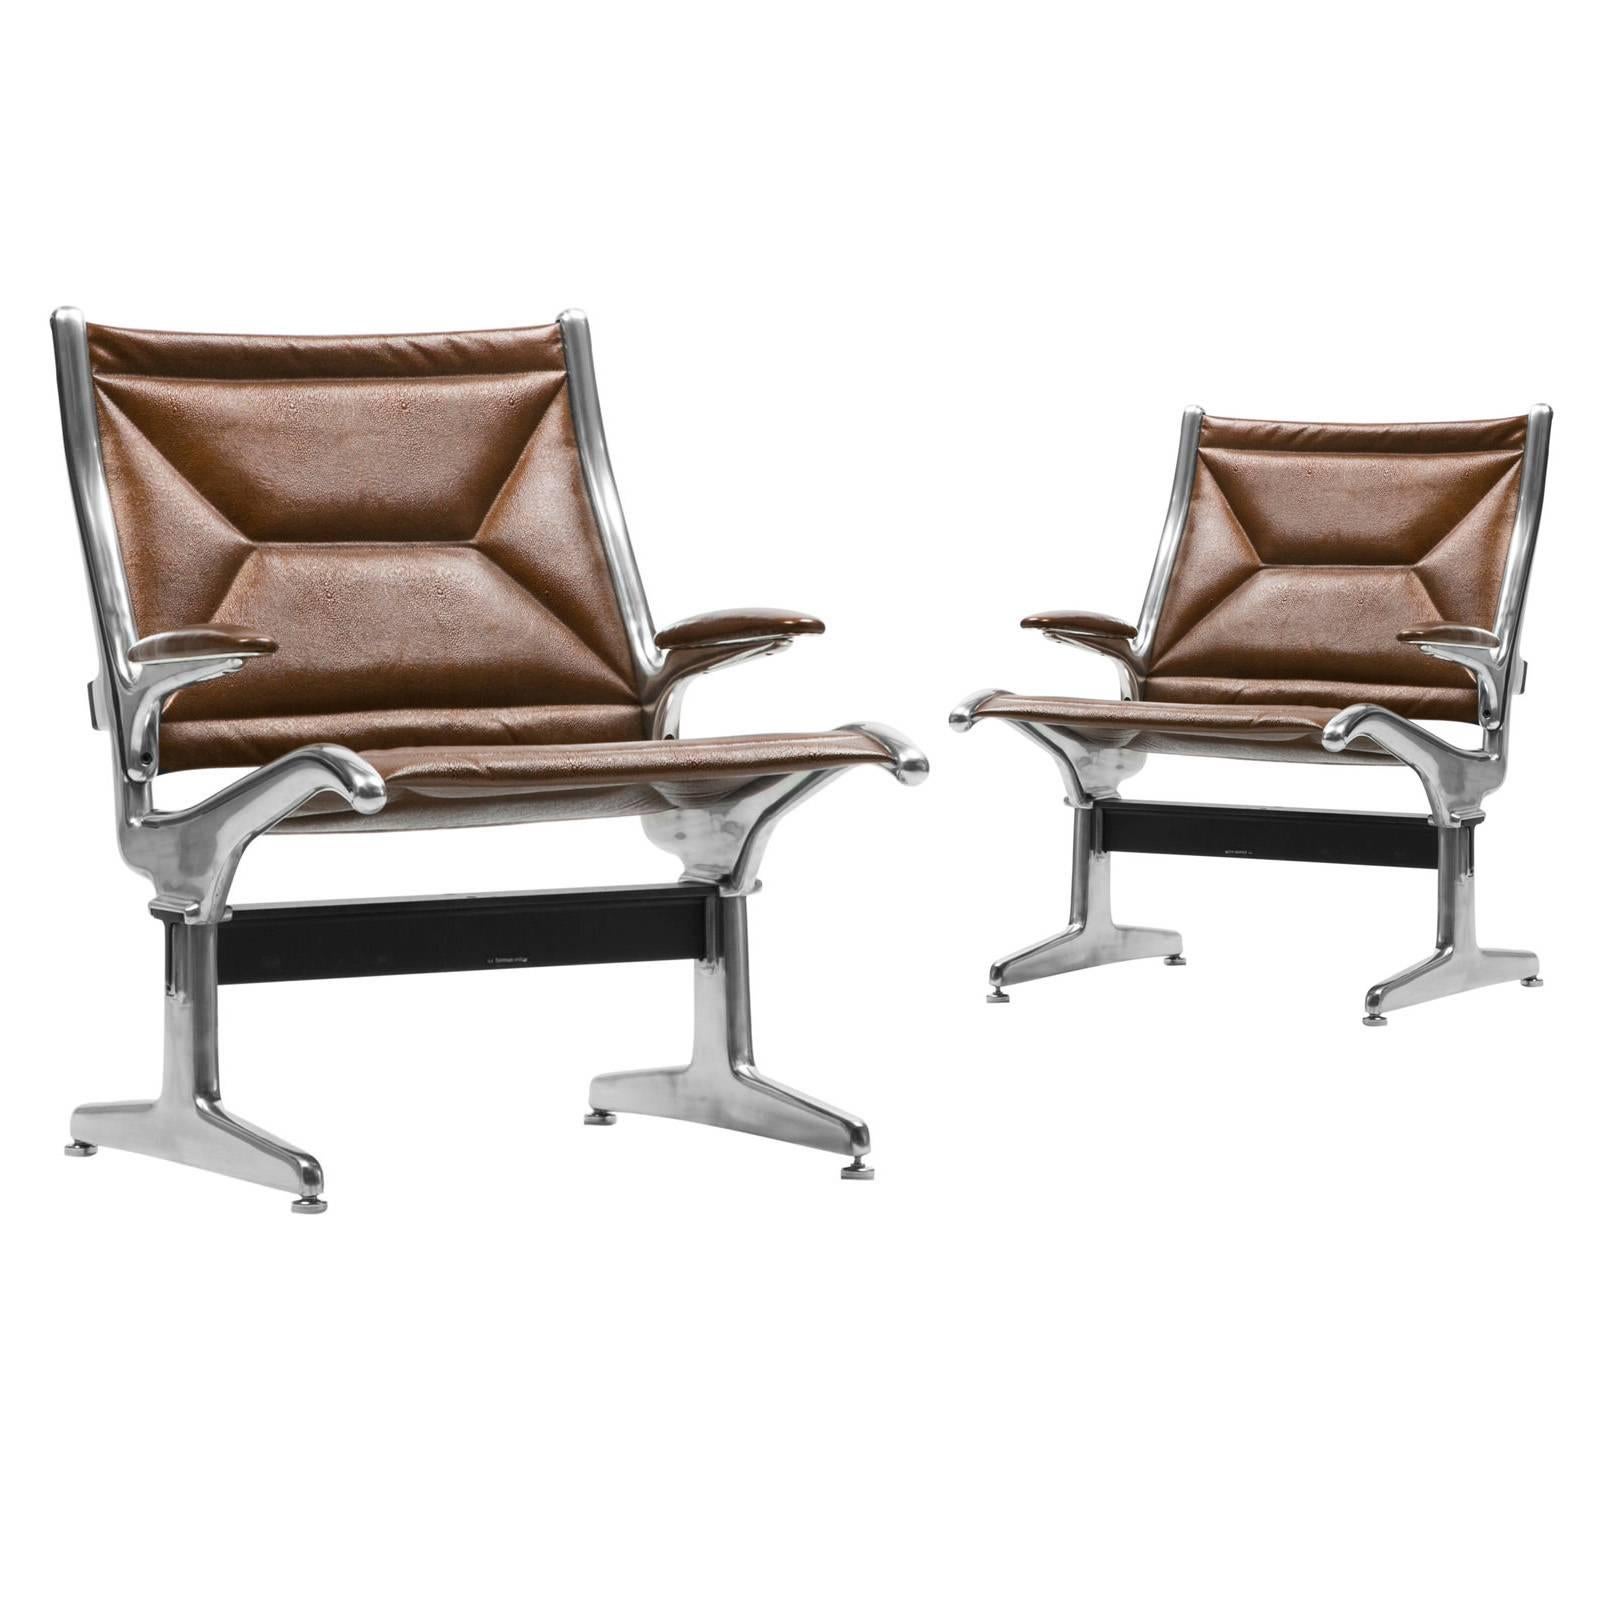 Eames for Herman Miller Tandem Sling Chair in Copper Edelman Leather